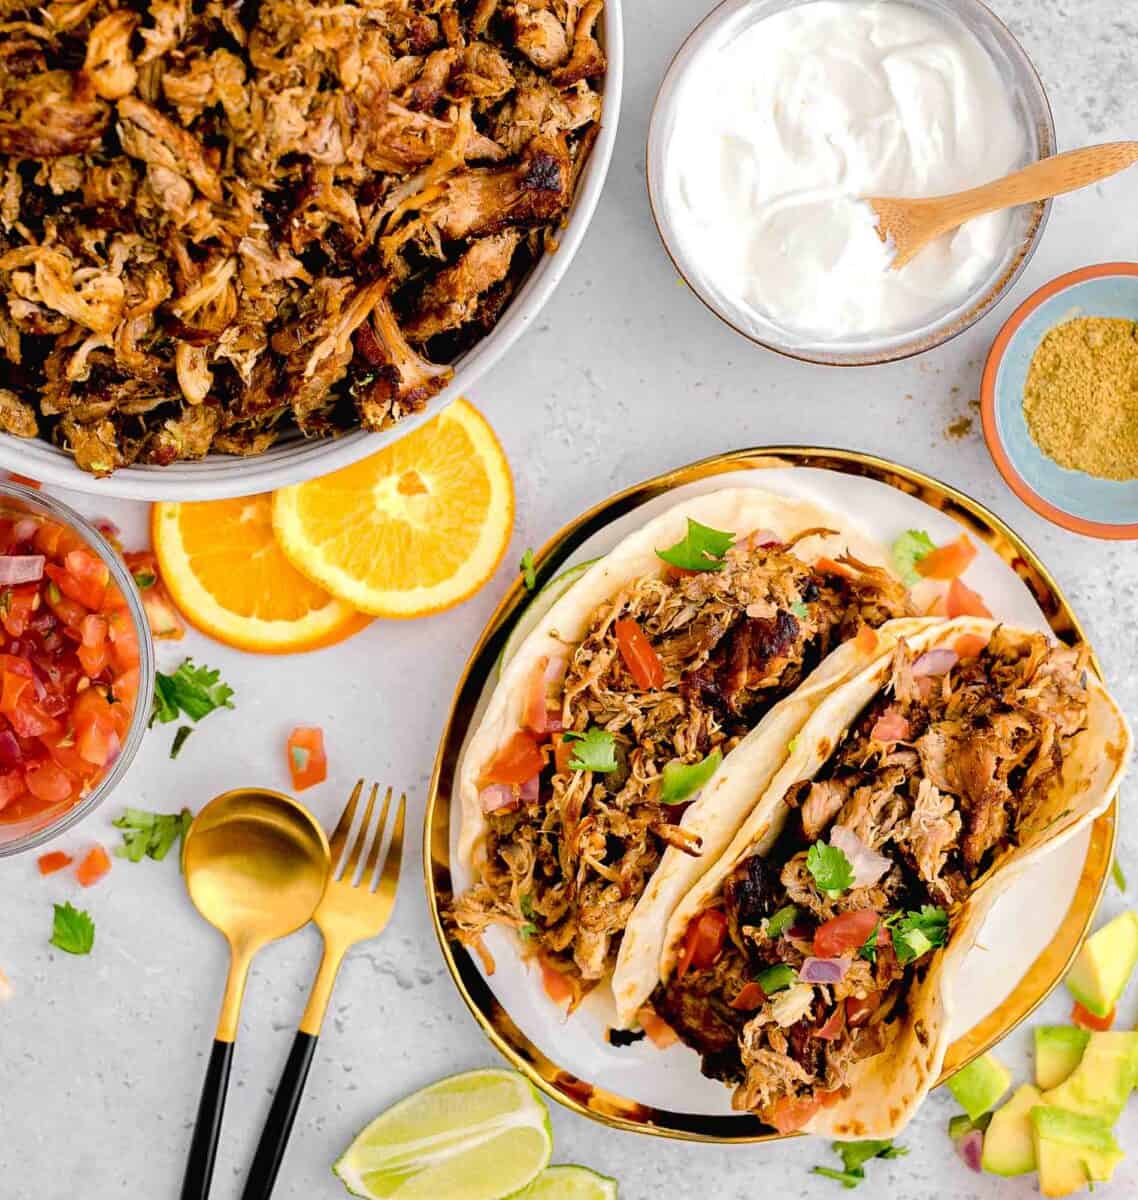 two tacos are placed next to a skillet filled with carnitas meat.